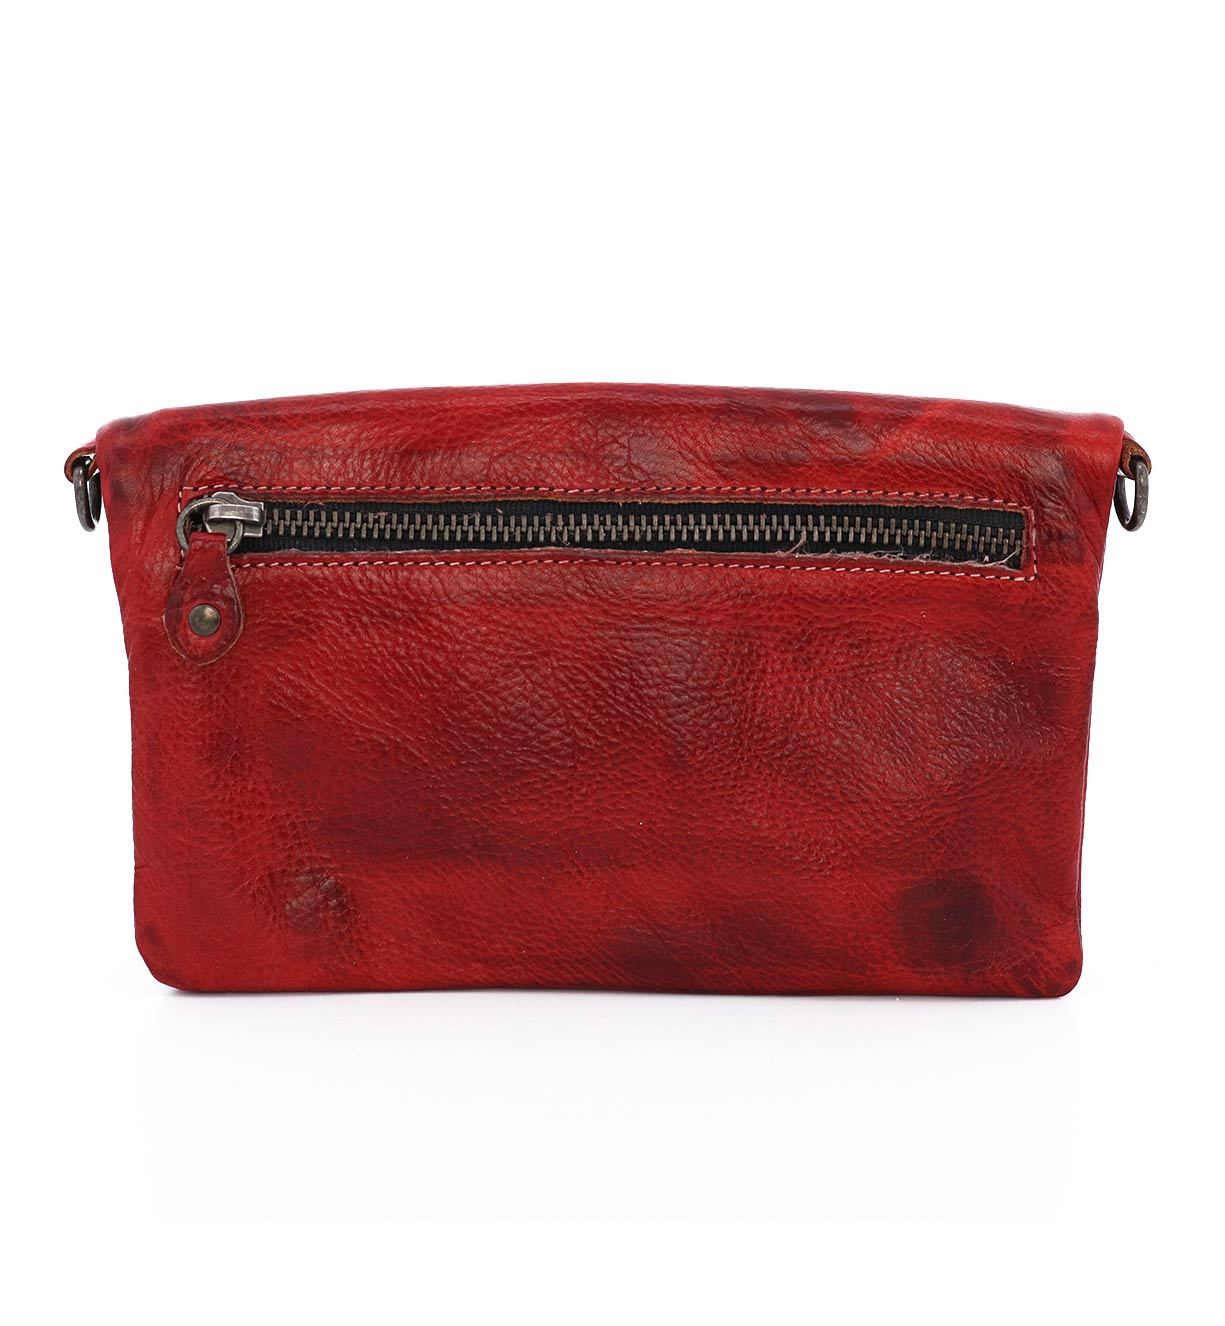 A Cadence by Bed Stu, a red leather cross body bag with a zipper.